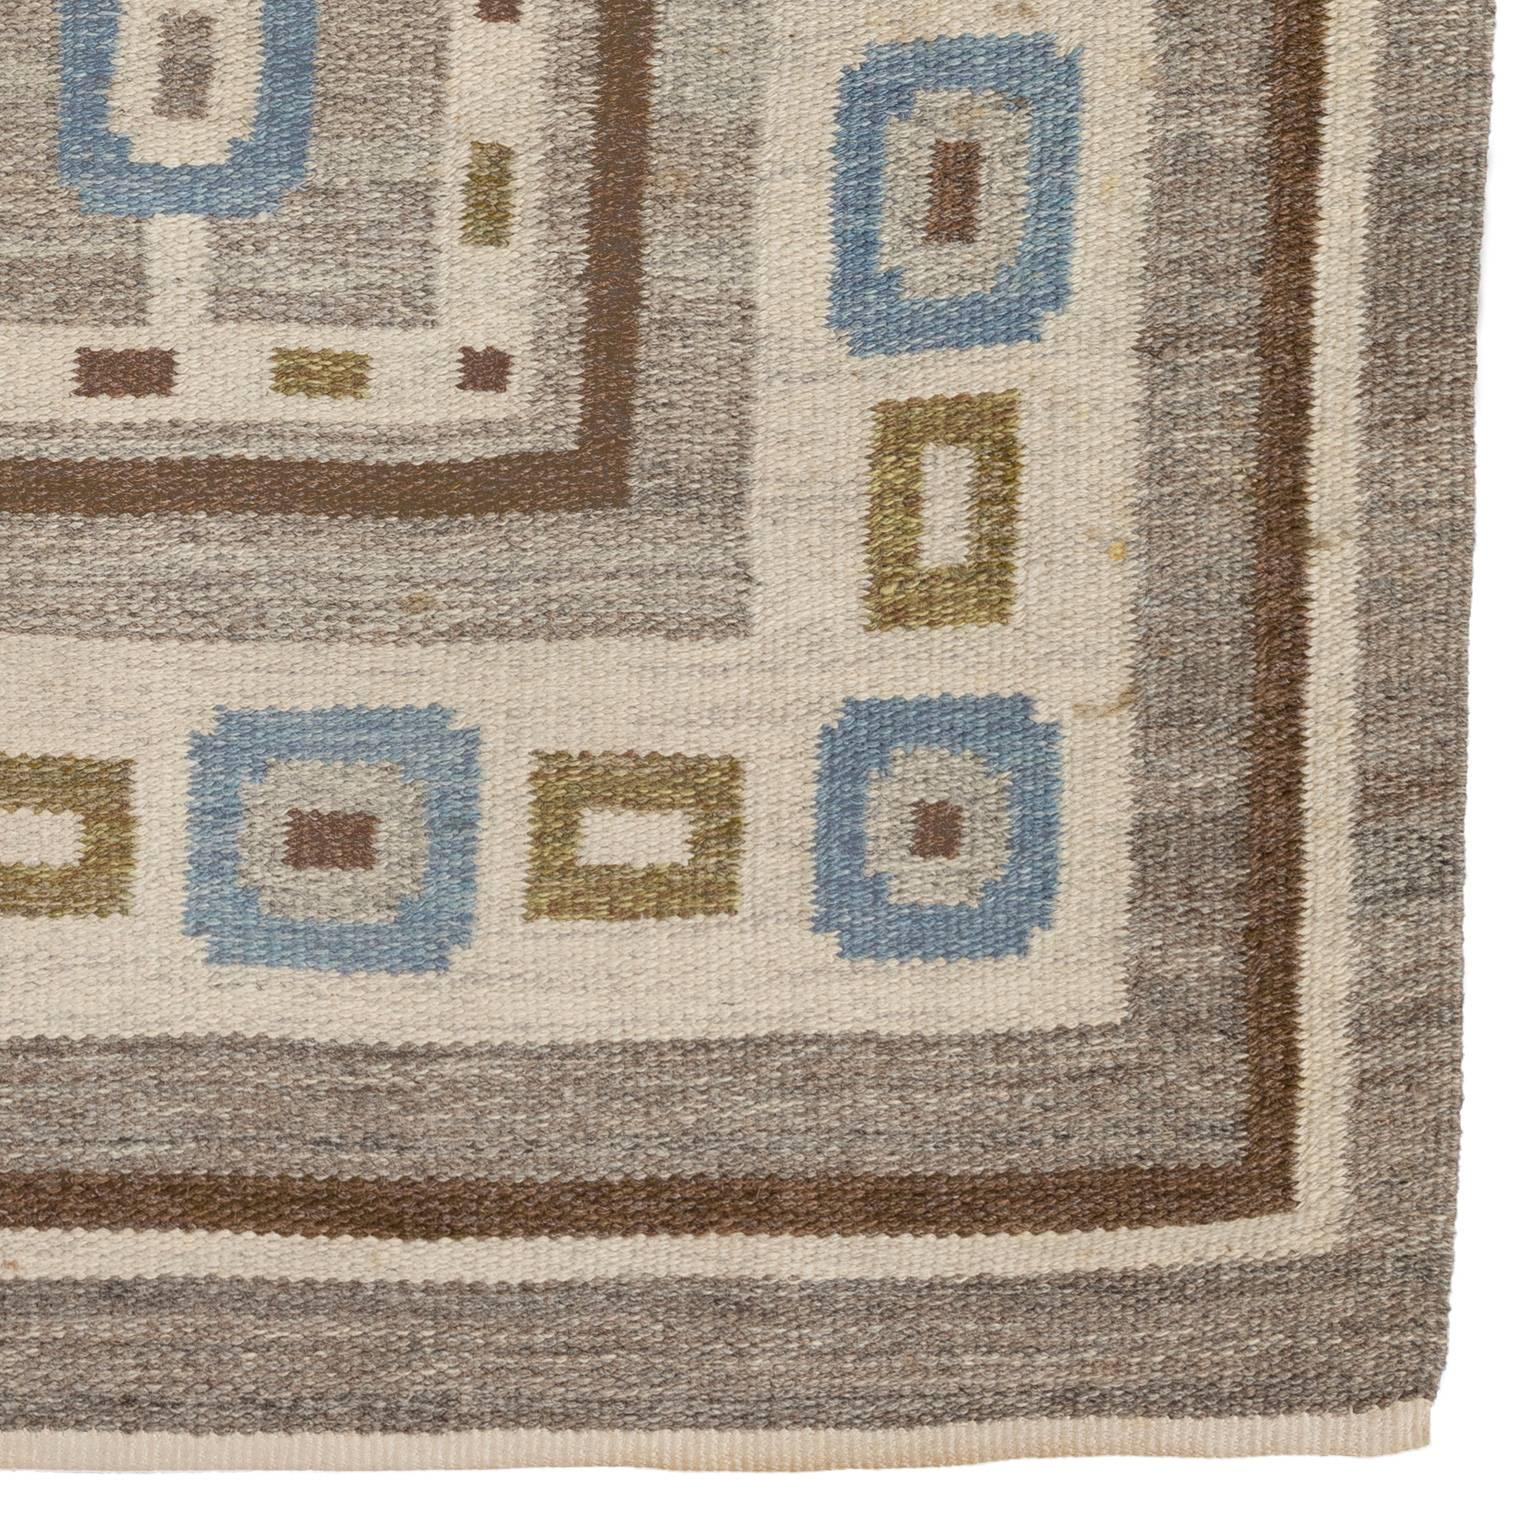 Hand-Woven Handwoven Swedish Wool rug in Flat-Weave signed V.J.